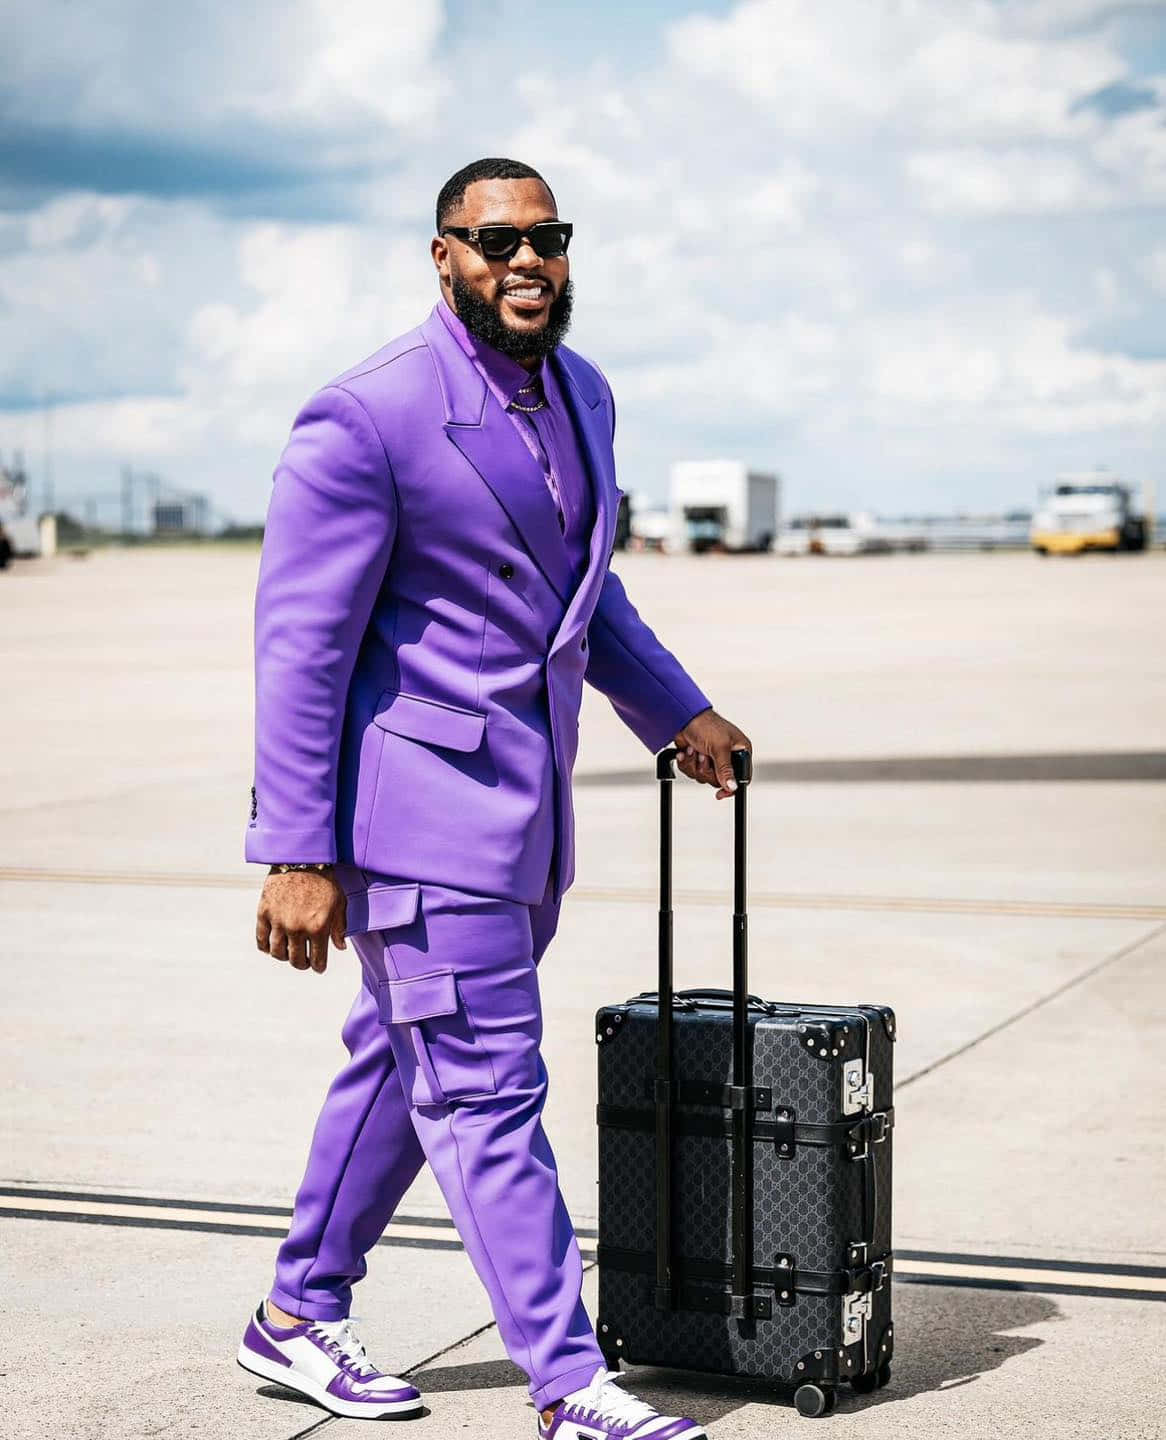 Stylish Manin Purple Suitwith Luggage Wallpaper